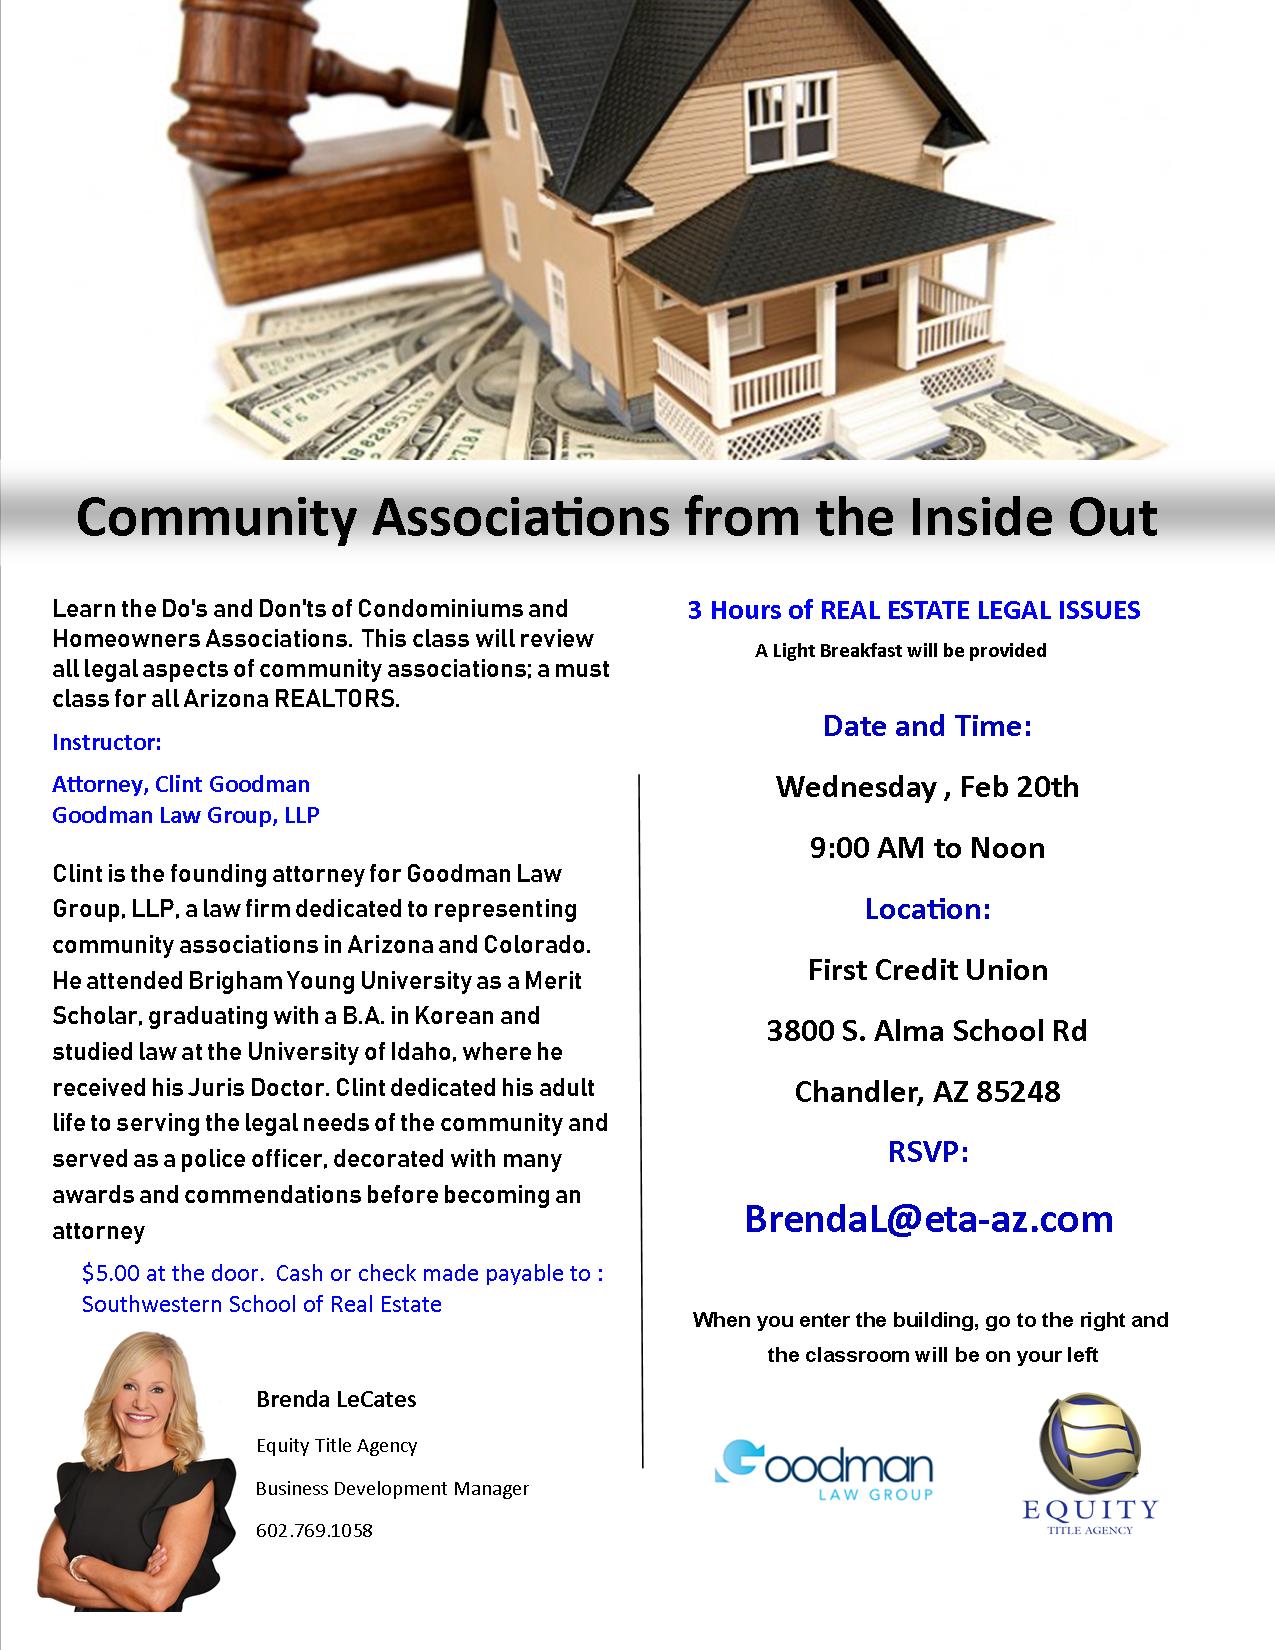 Community Associations from the Inside Out